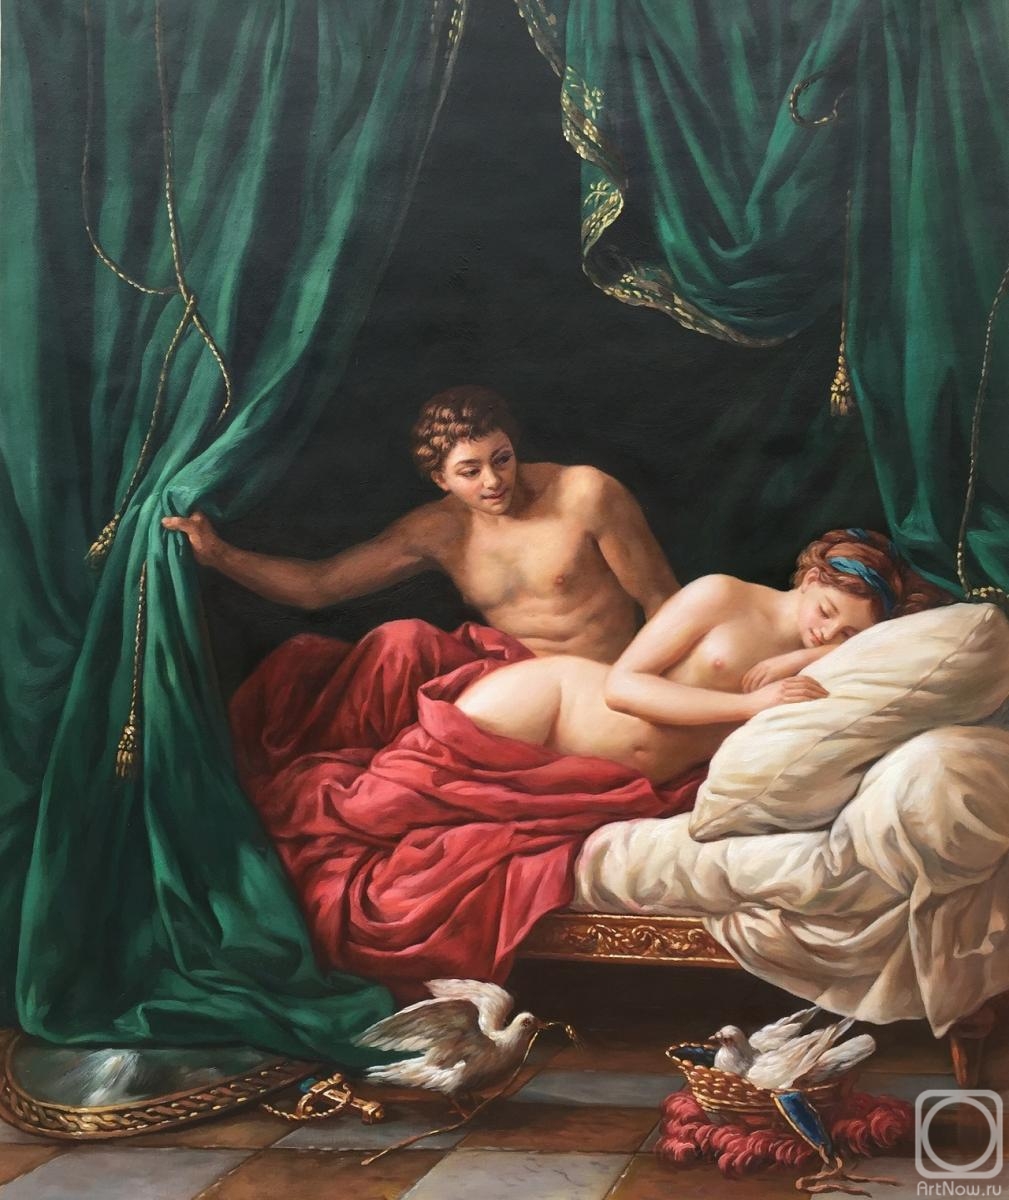 Kamskij Savelij. A copy of the painting by Lagrenet Louis-Jean-Francois. Mars and Venus, an allegory of the world